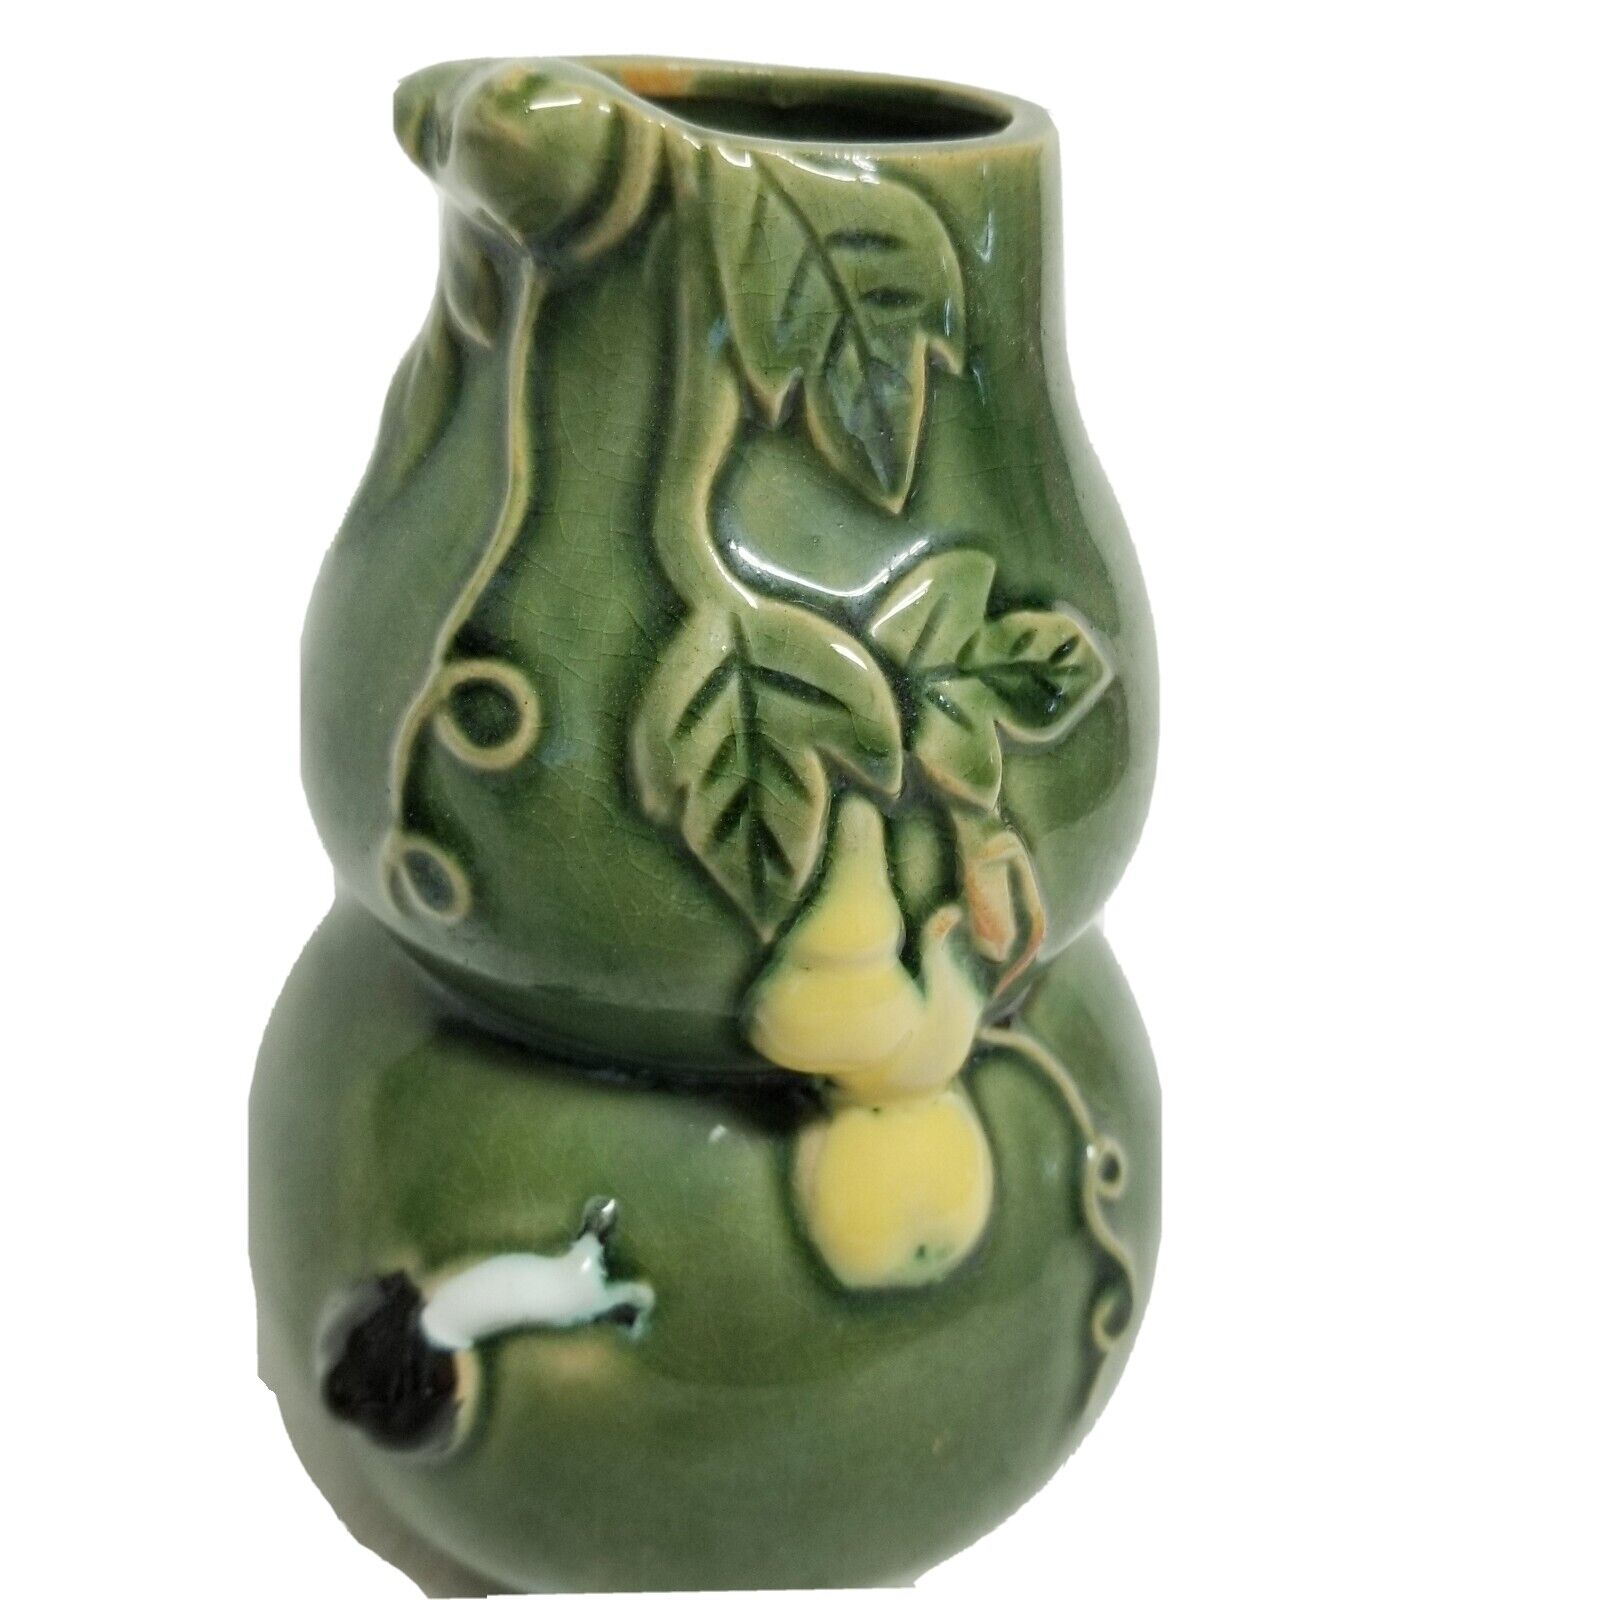 Vintage Unsigned Art Pottery Gourd Shaped VASE, Green Glazed With Squash & Snail